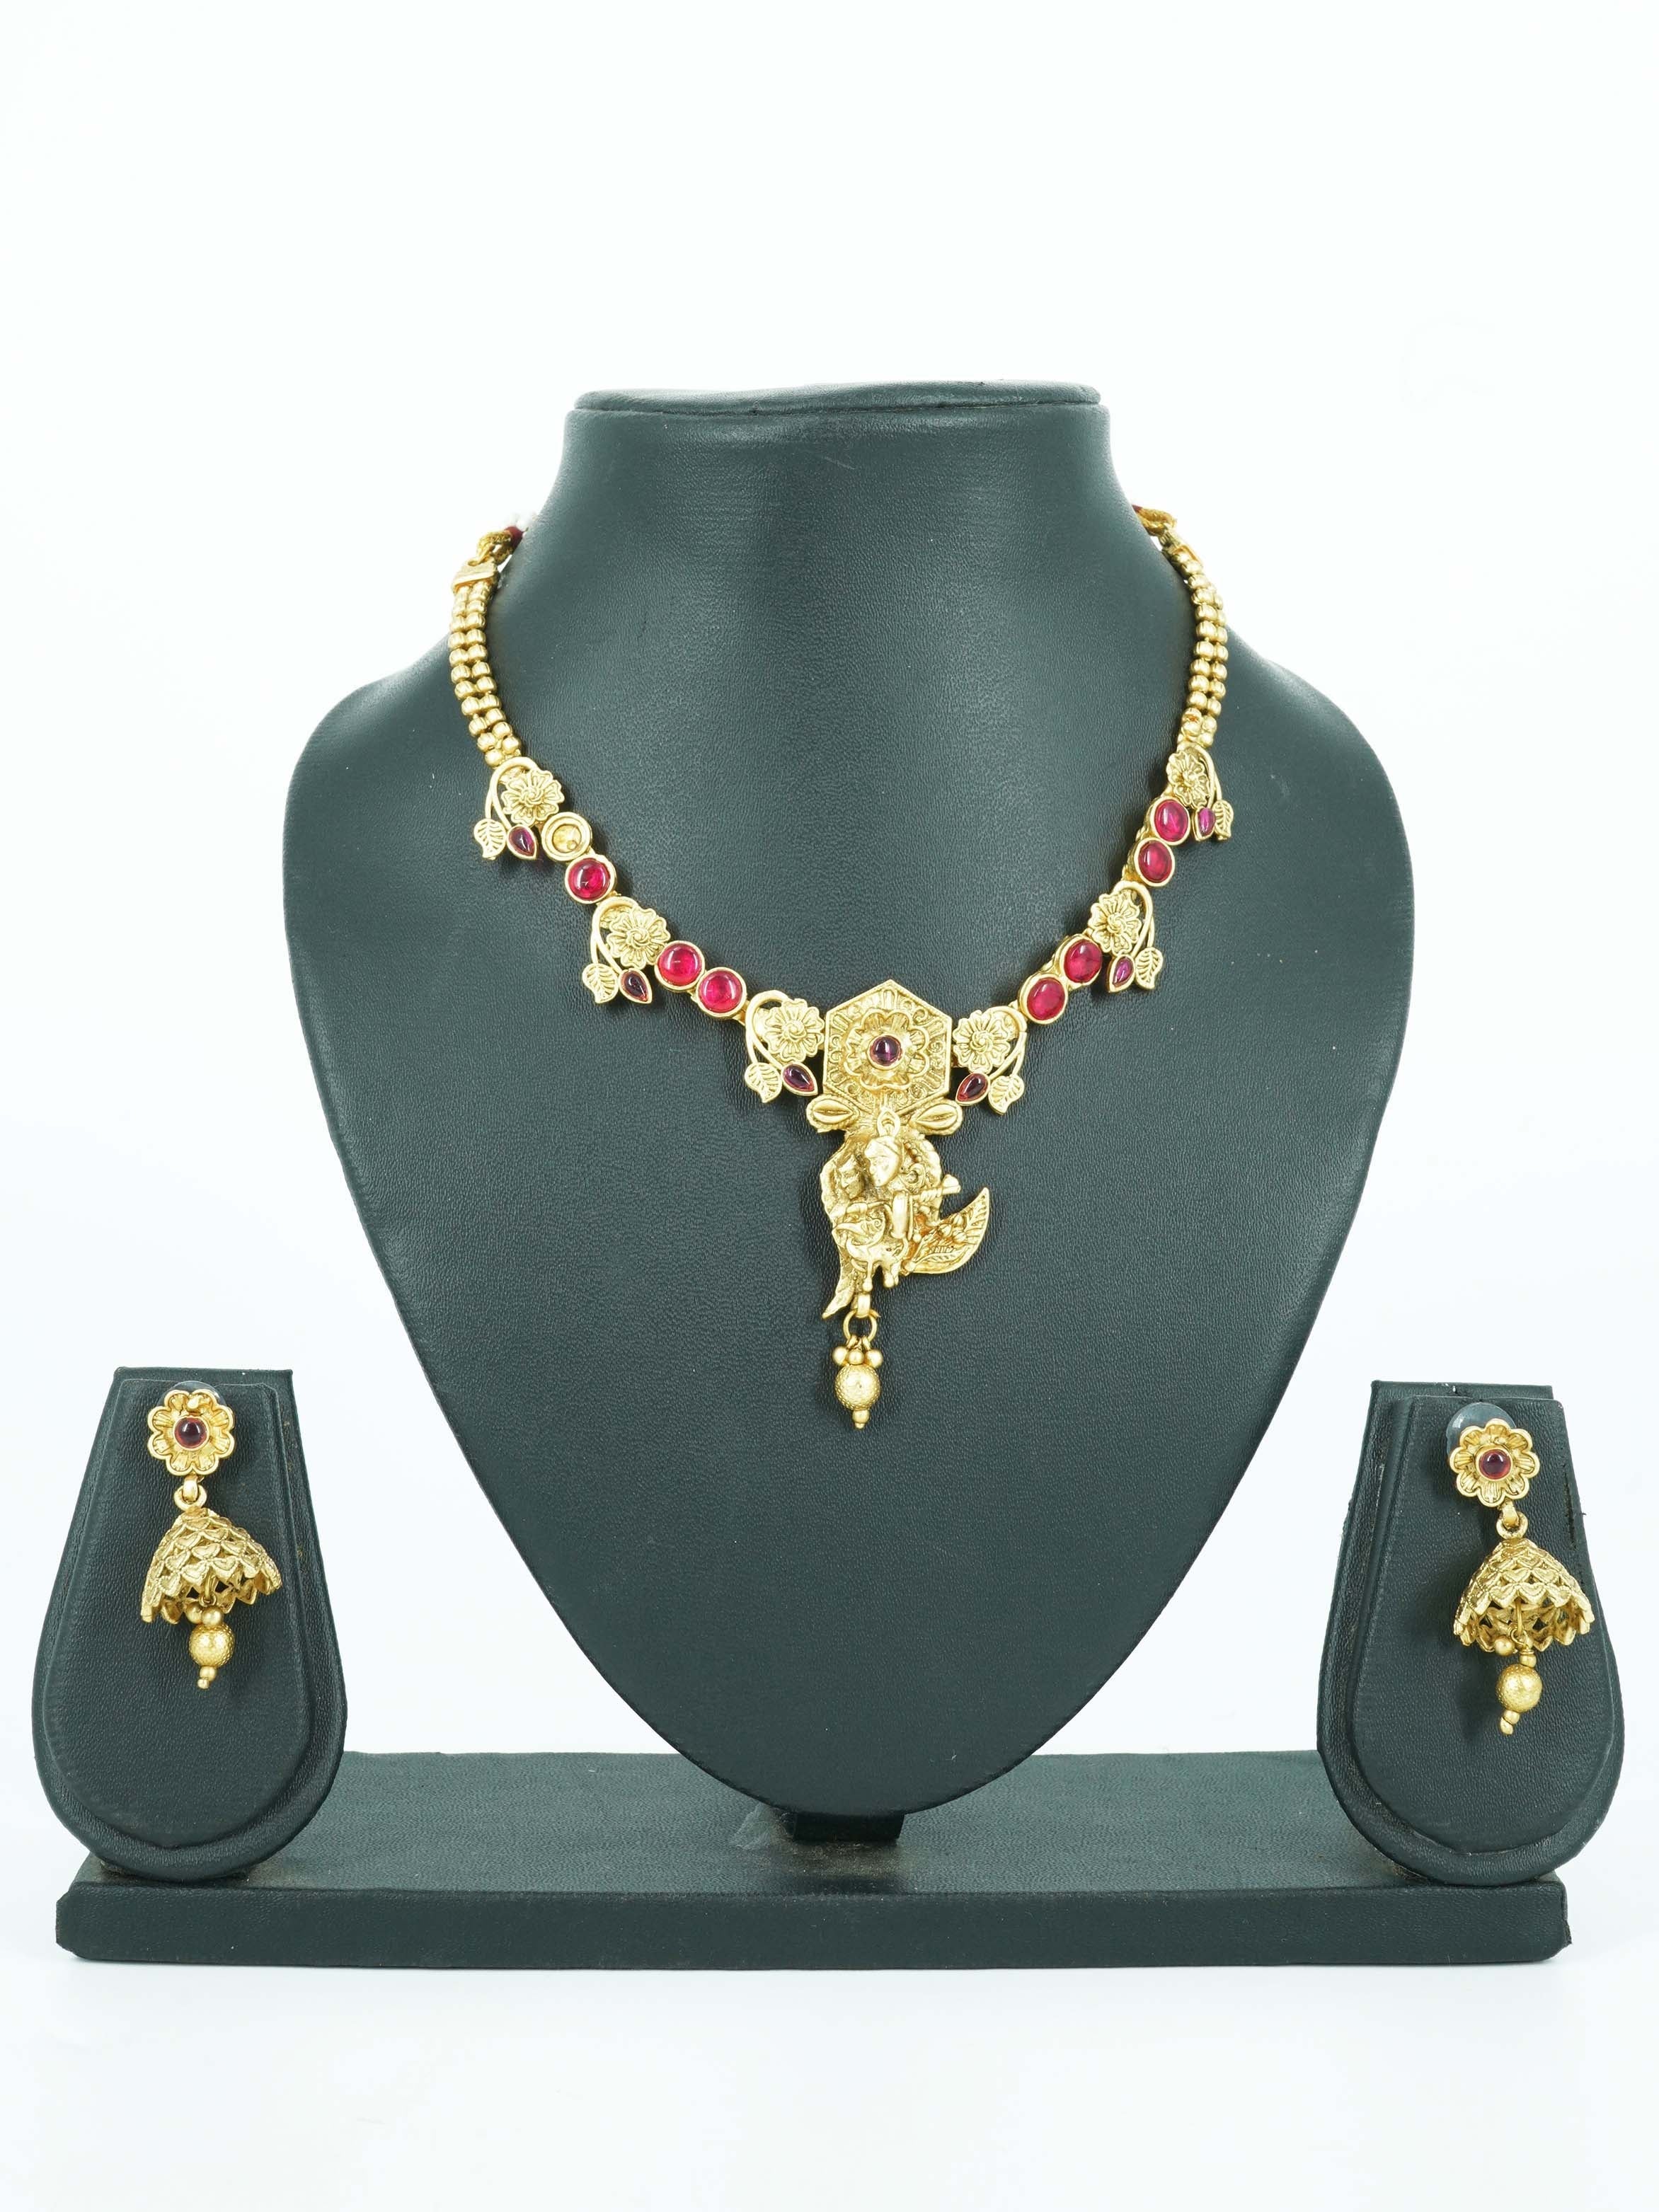 Premium Gold Plated Radhe Krishna Necklace Set in different colors 11991N-1